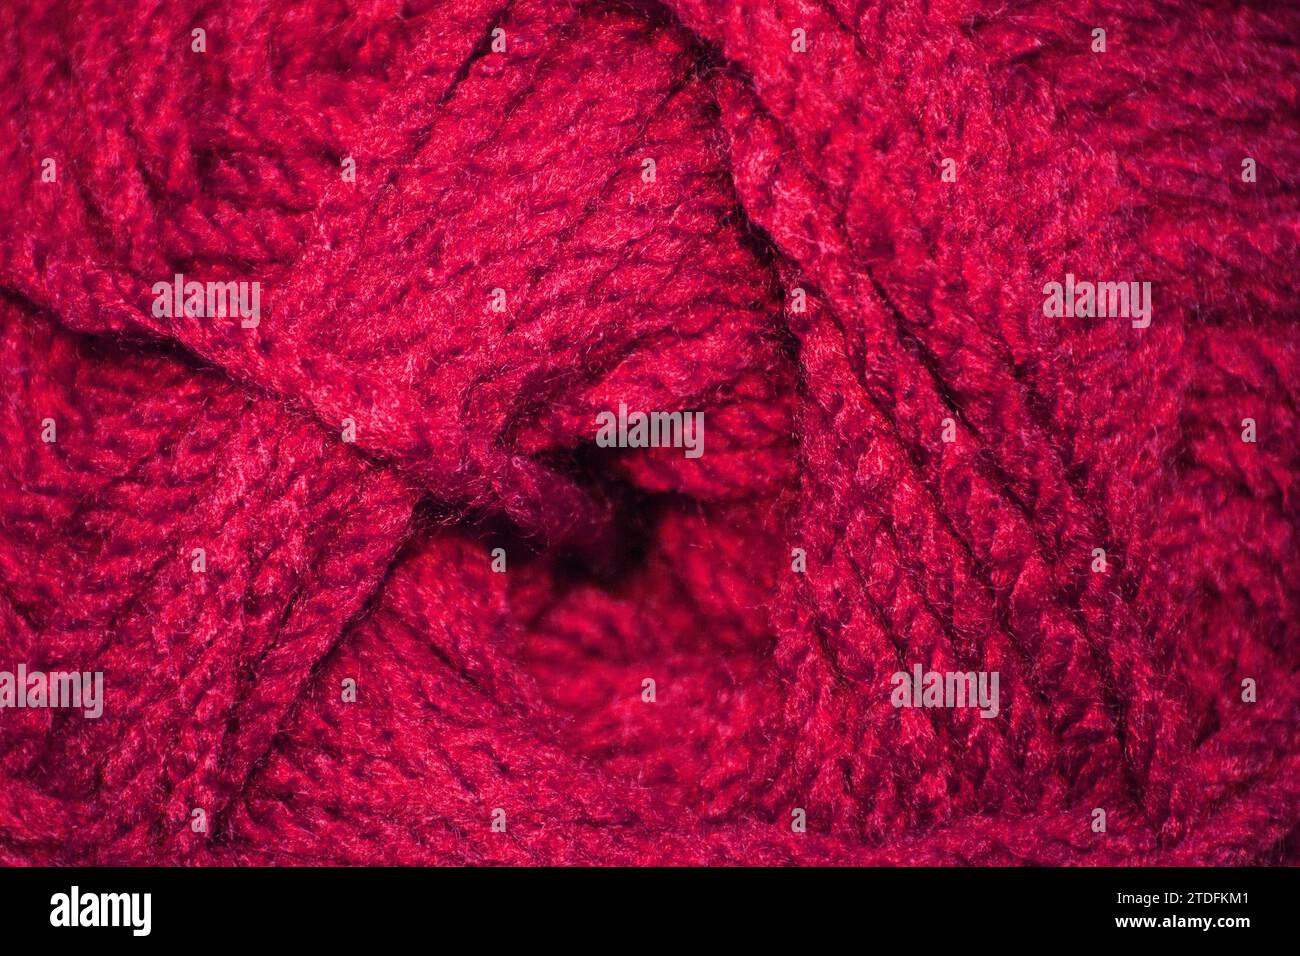 Ball of red wool, texture or background Stock Photo